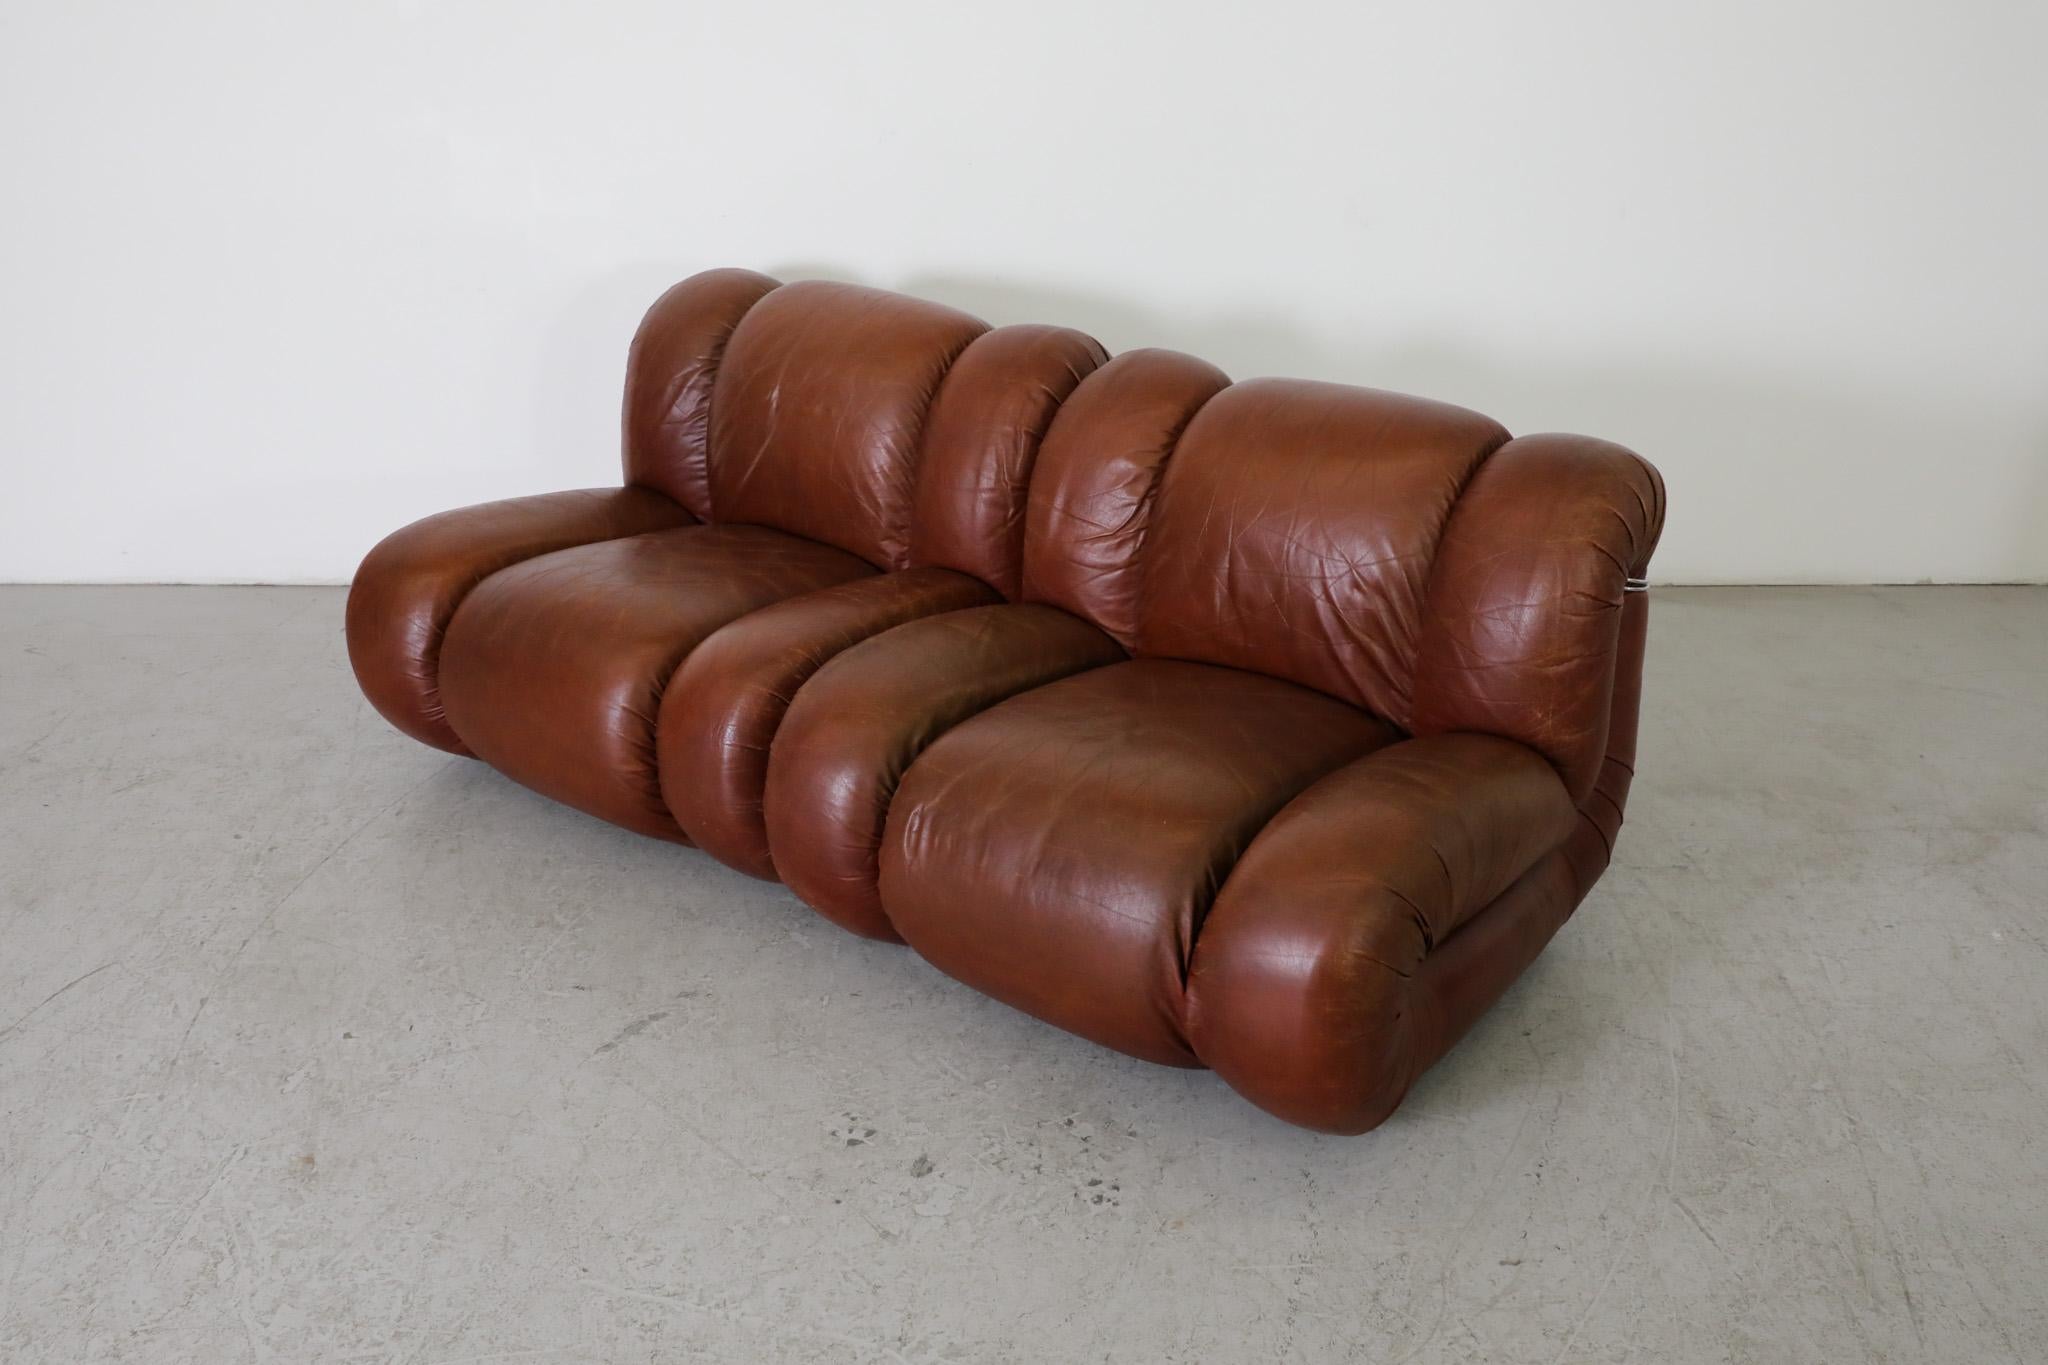 Late 20th Century Mimo Padova Velasquez Modular Sofa In Brown Leather And Chrome, Italy 1970s For Sale